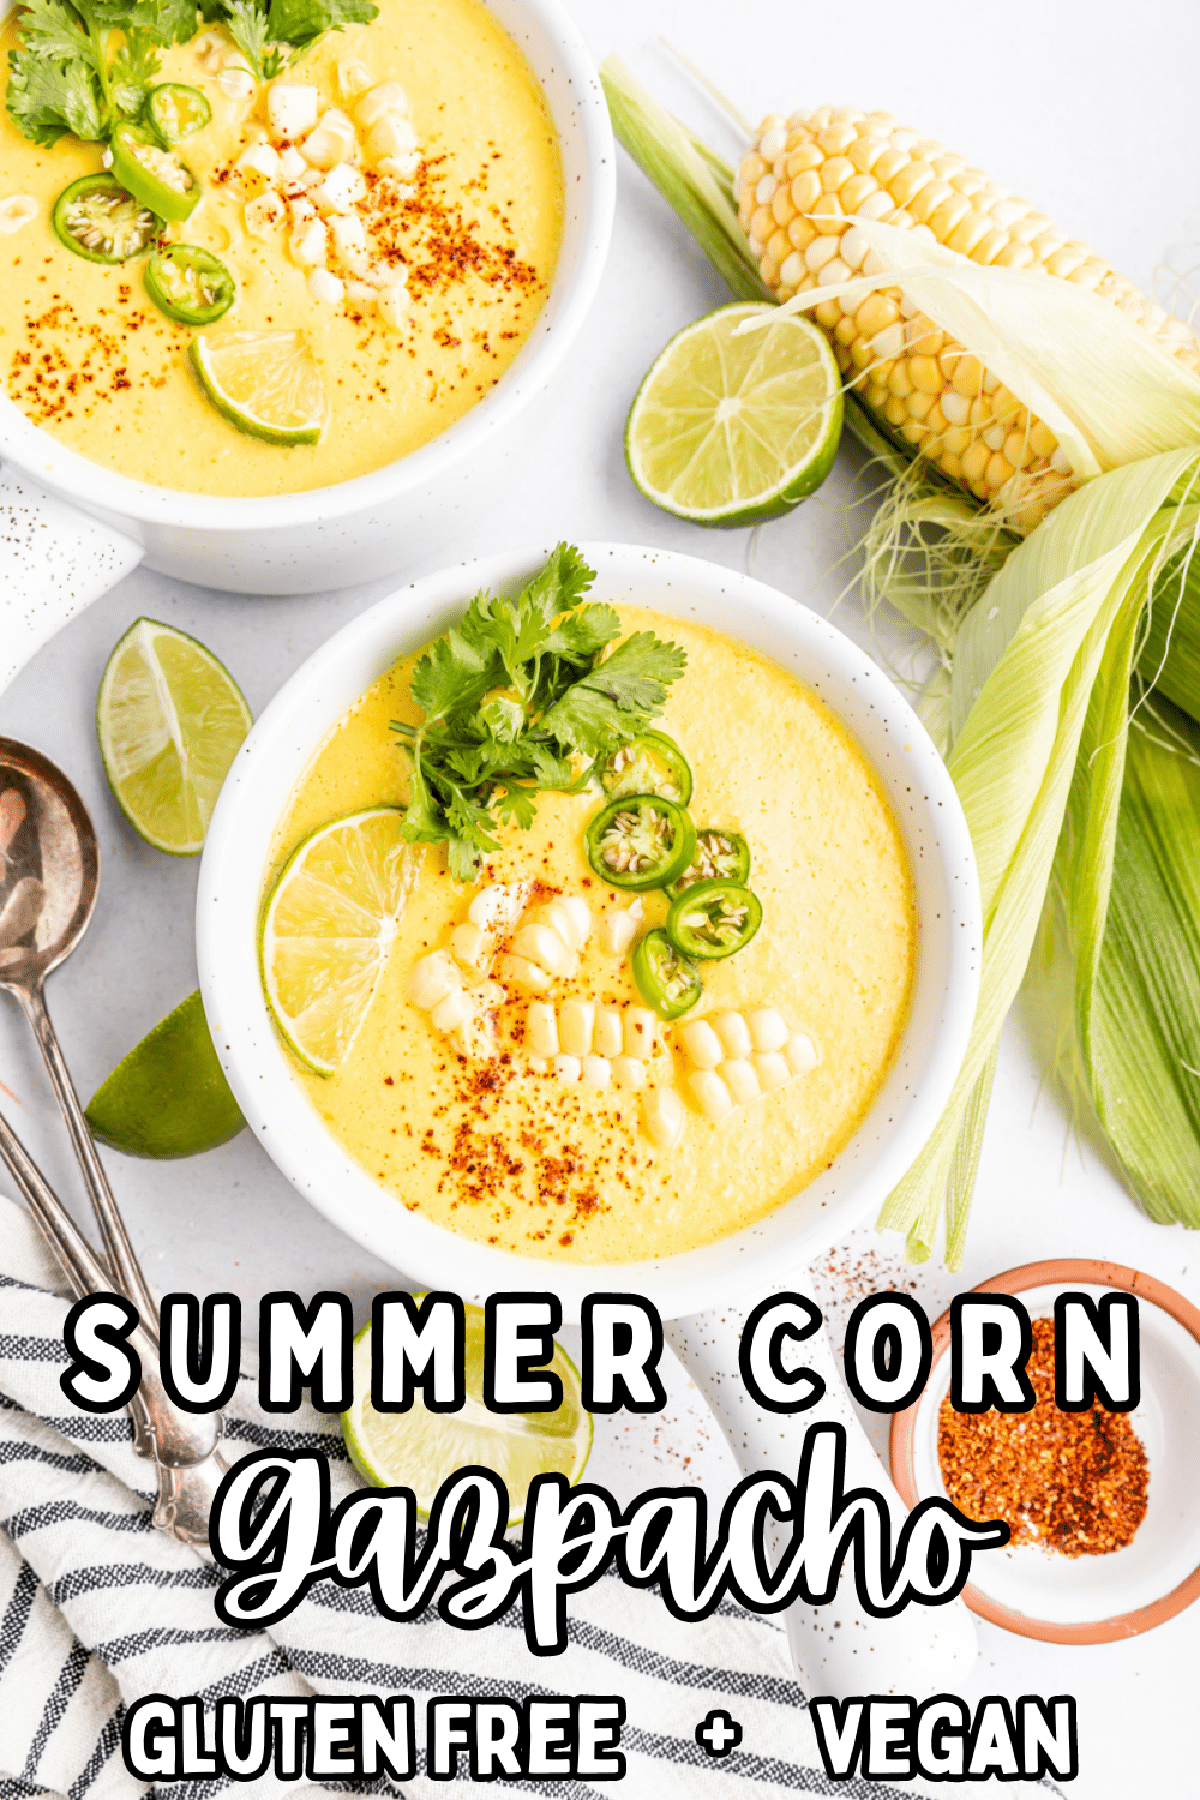 Overhead view of bright yellow summer corn gazpacho in white bowls with handles. Garnished with corn pieces, sliced Serrano pepper, cilantro, and paprika. A full ear of corn sitting alongside bowls of soup, with extra line wedges, spoons, and a small bowl of paprika.